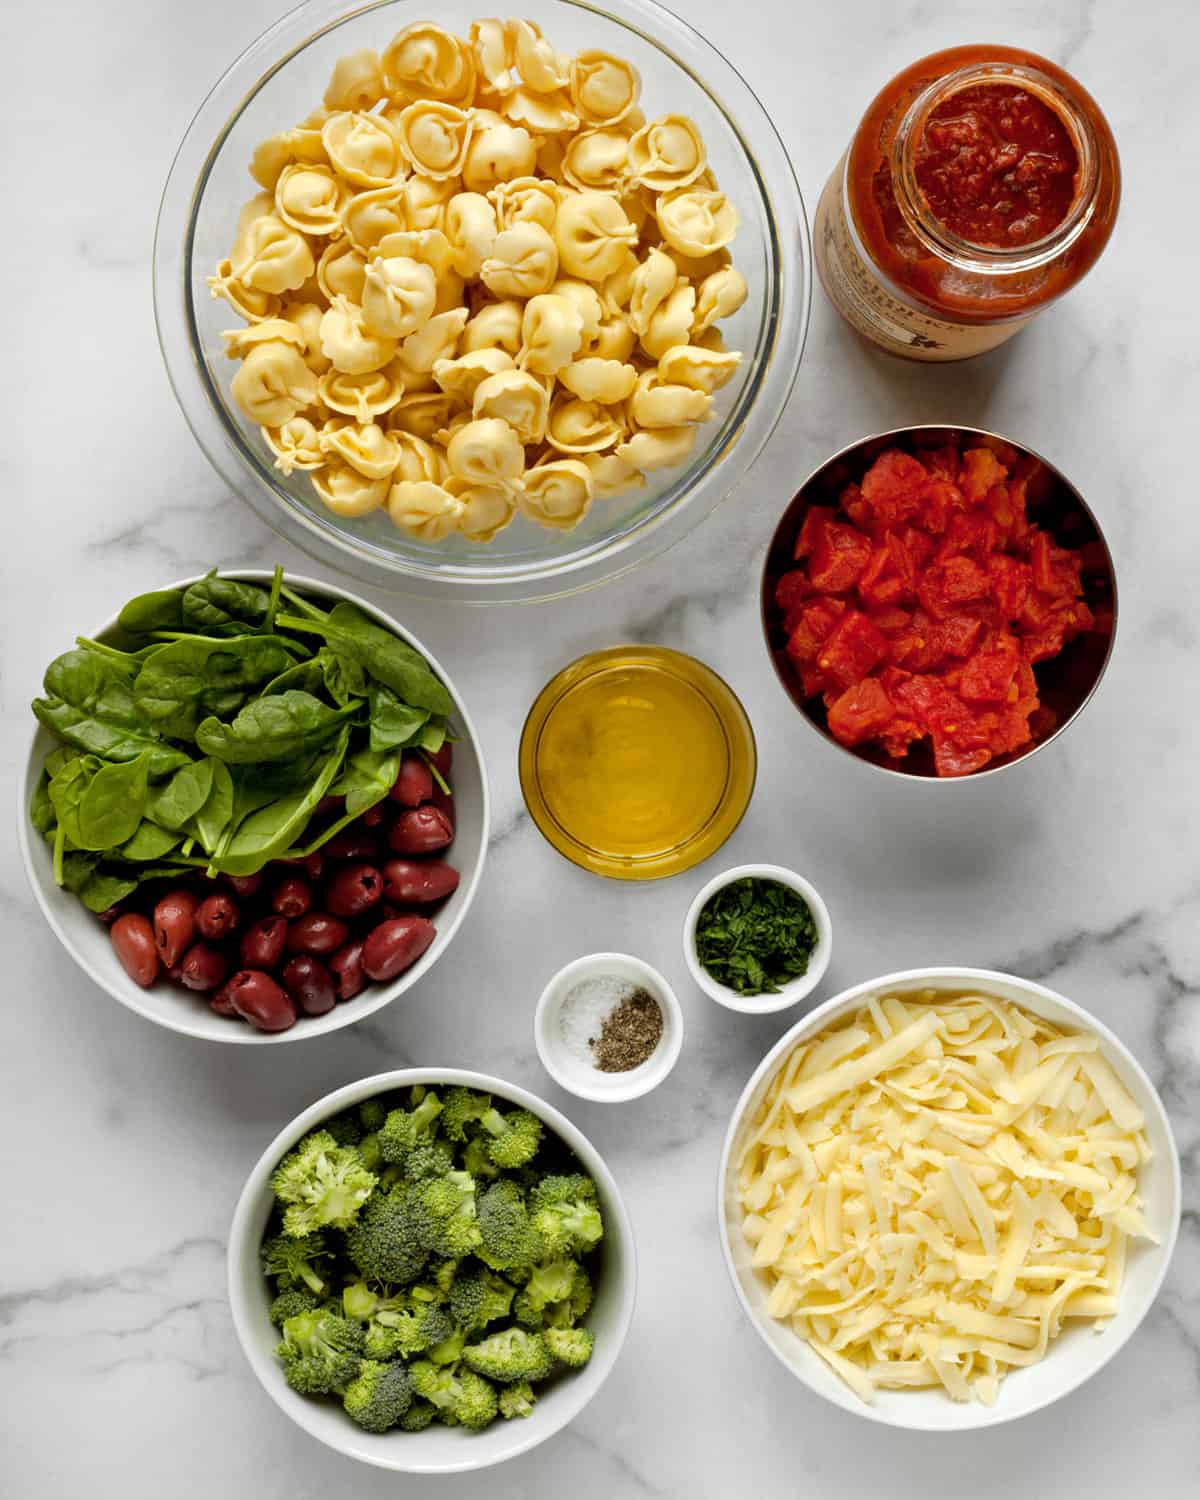 Ingredients including tortellini, olives, spinach, tomatoes, cheese, olive oil and broccoli.